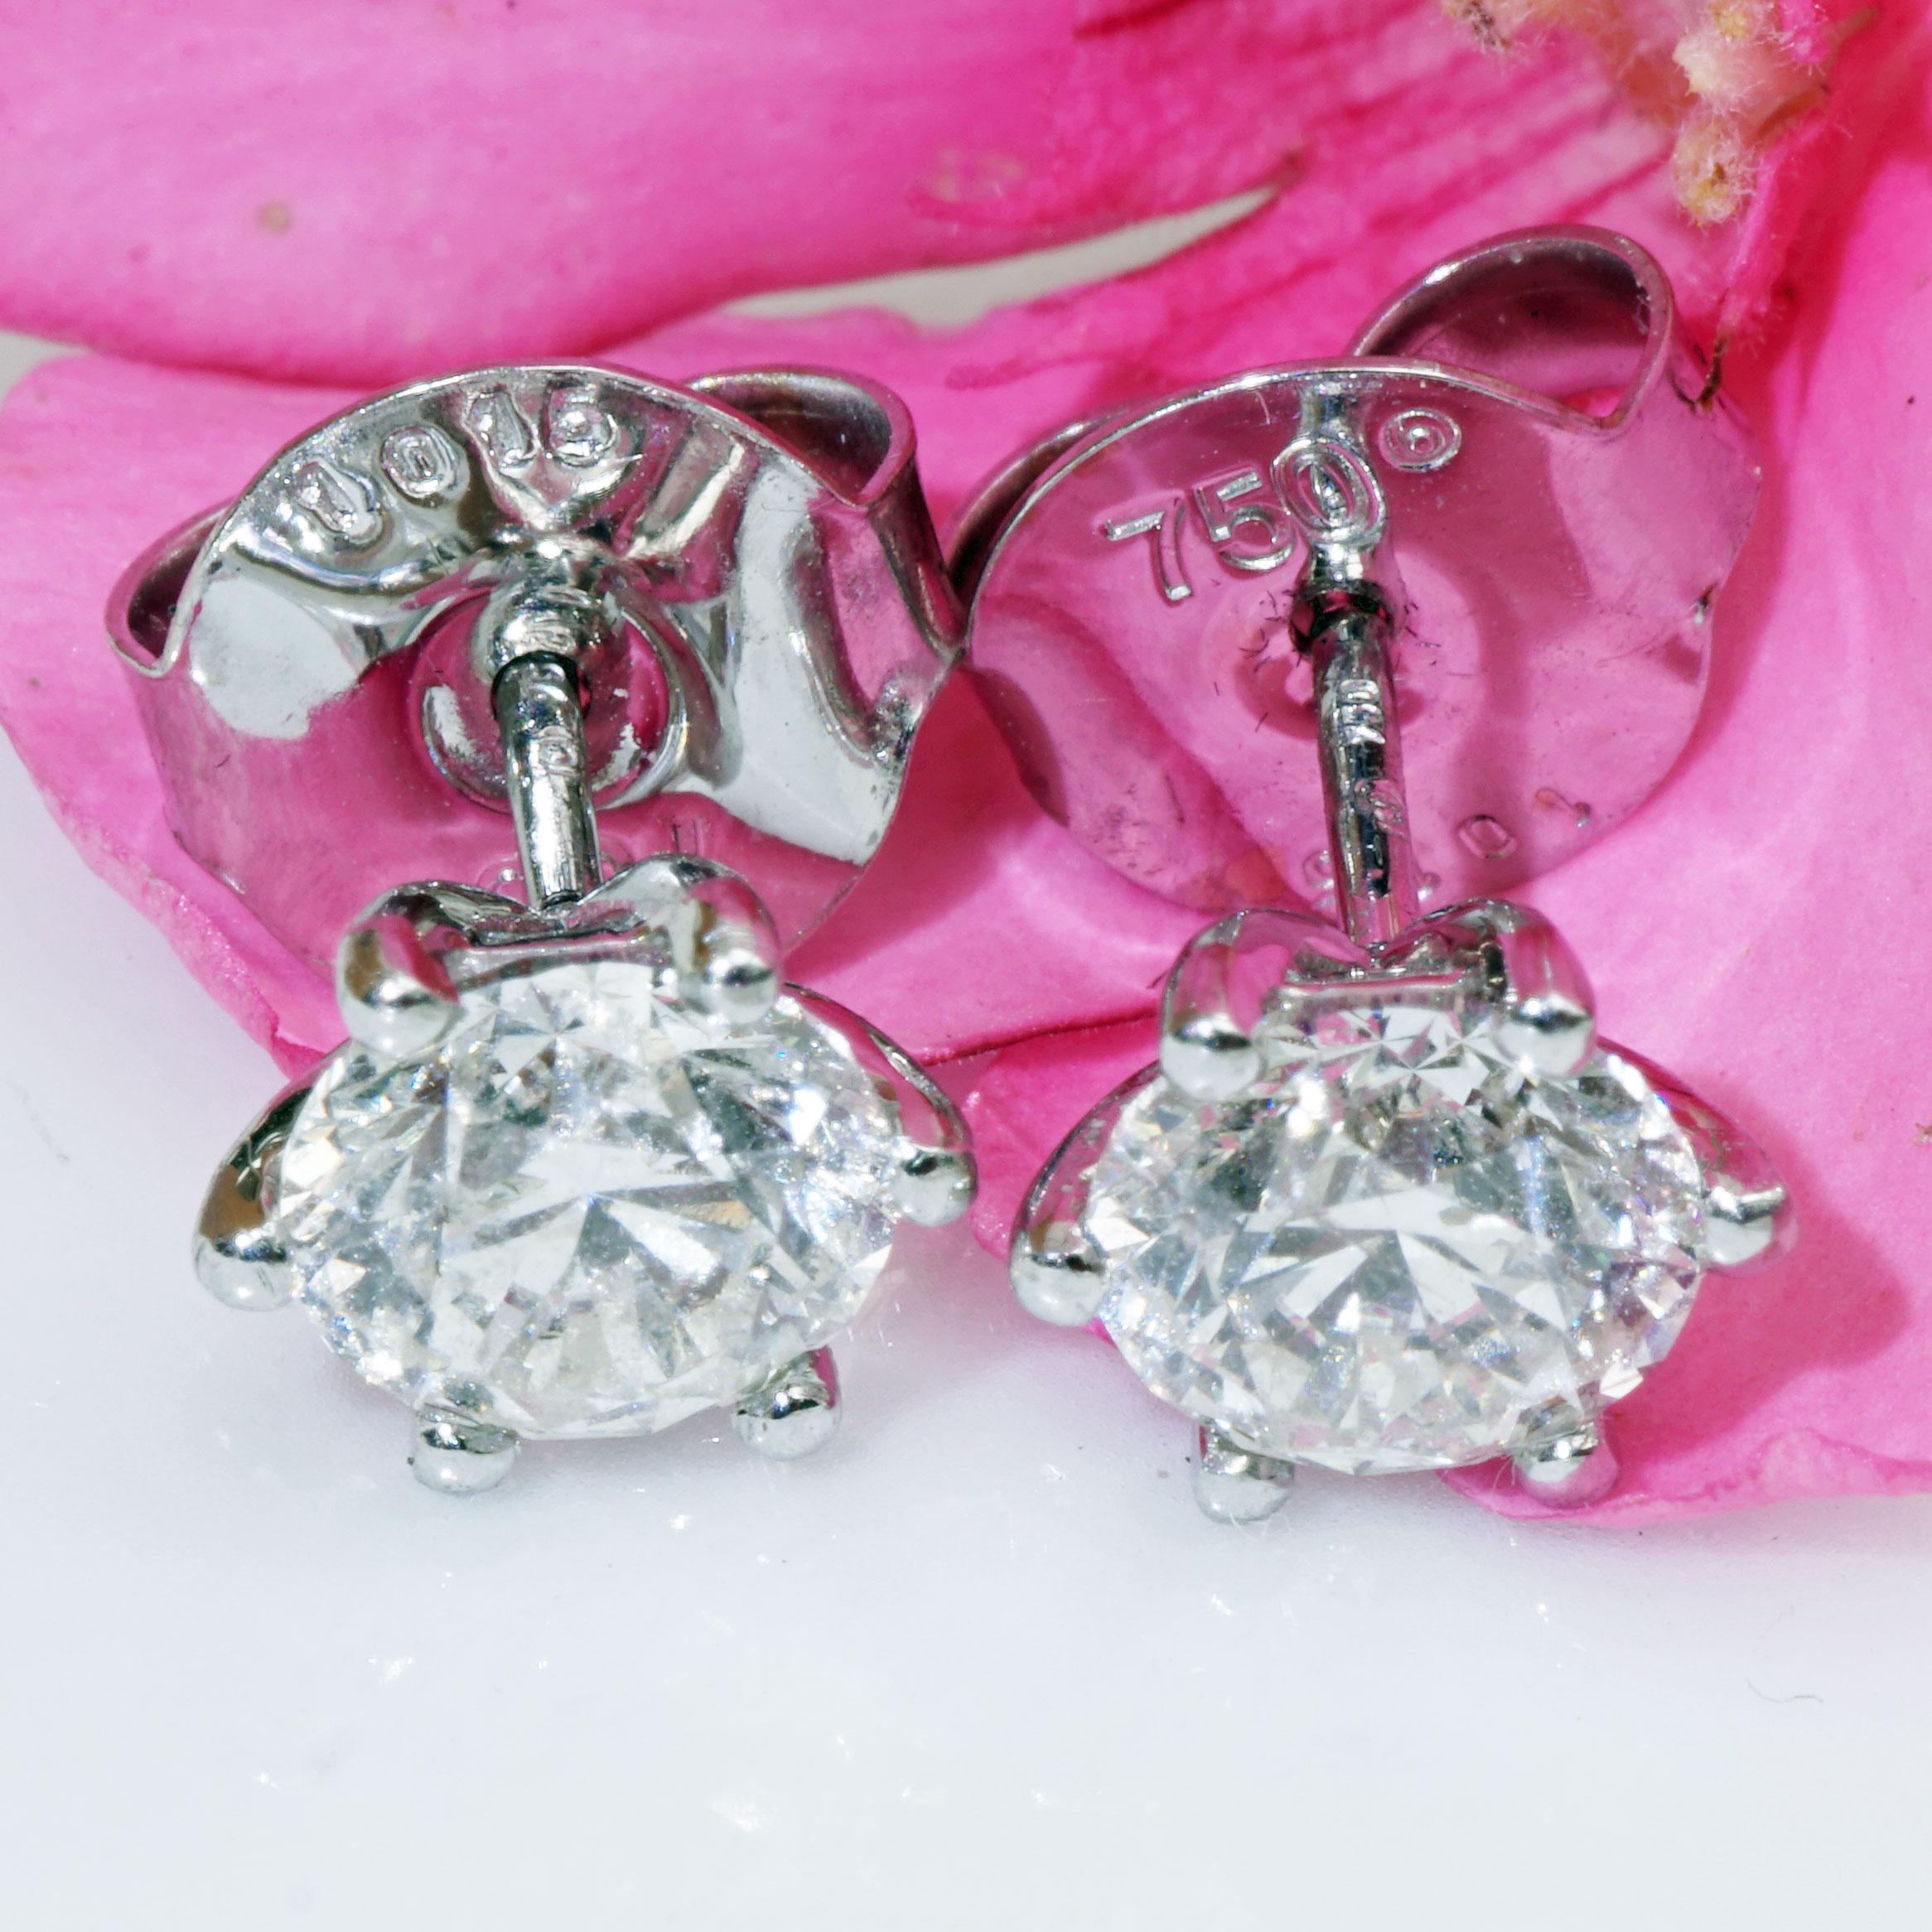 the jewelry dream of most women, one time solitaire brilliant stud earrings for the ears, the perfect piece of jewelry for a lifetime, GIA certified full cut brilliant total approx 2.03 ct, W (white H) / SI2 (small inclusions), cut very good, in 750